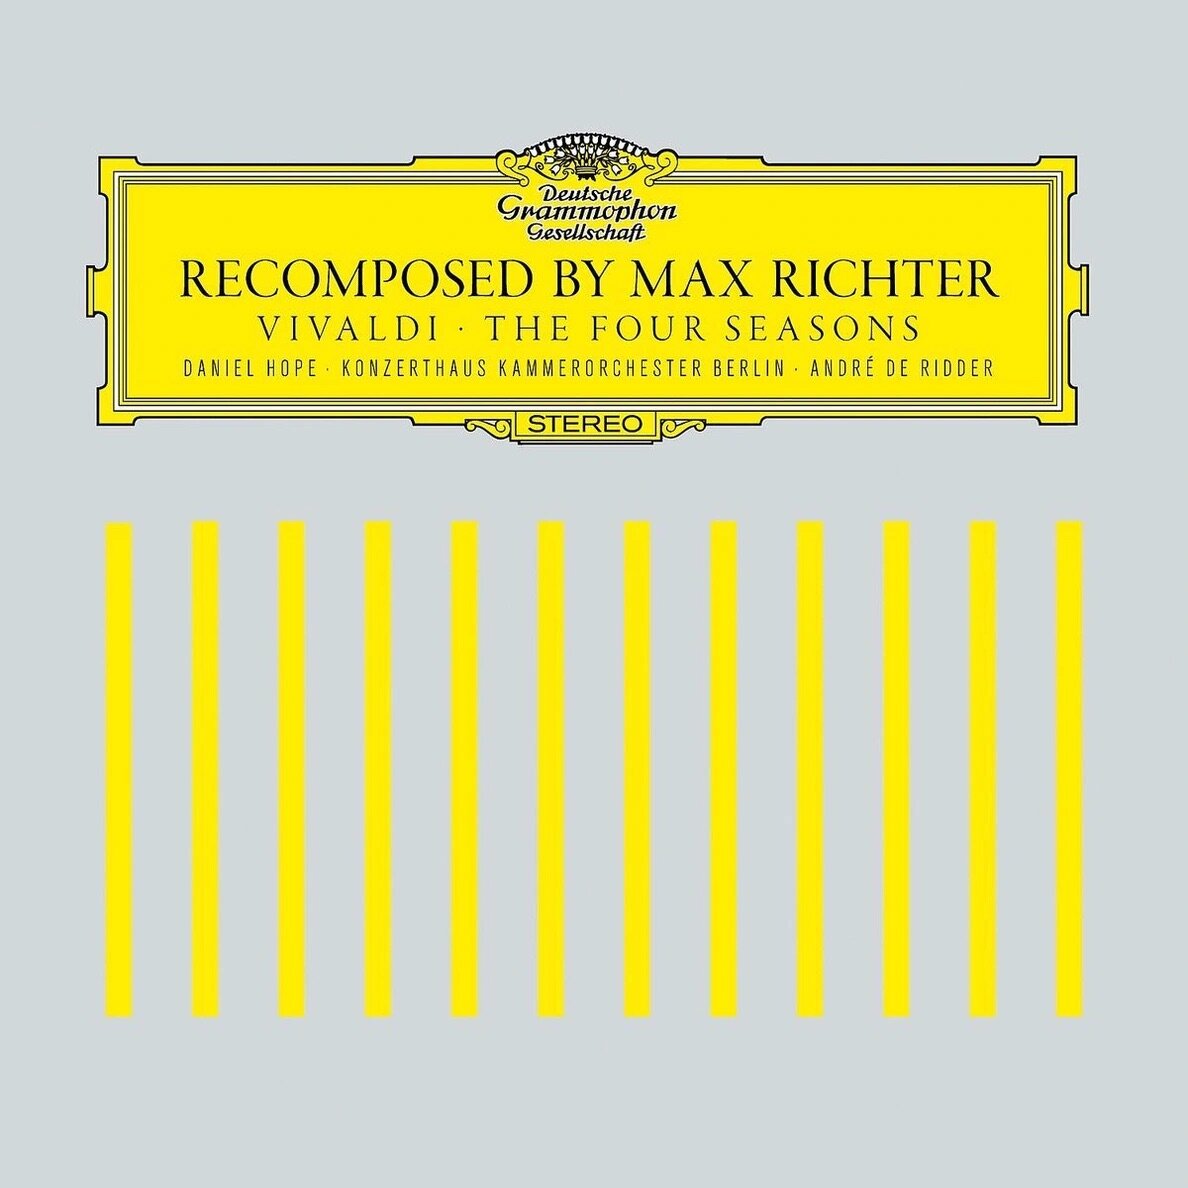 MAX RICHTER - RECOMPOSED BY MAX RICHTER: VIVALDI THE FOUR SEASONS (2LP) виниловая пластинка